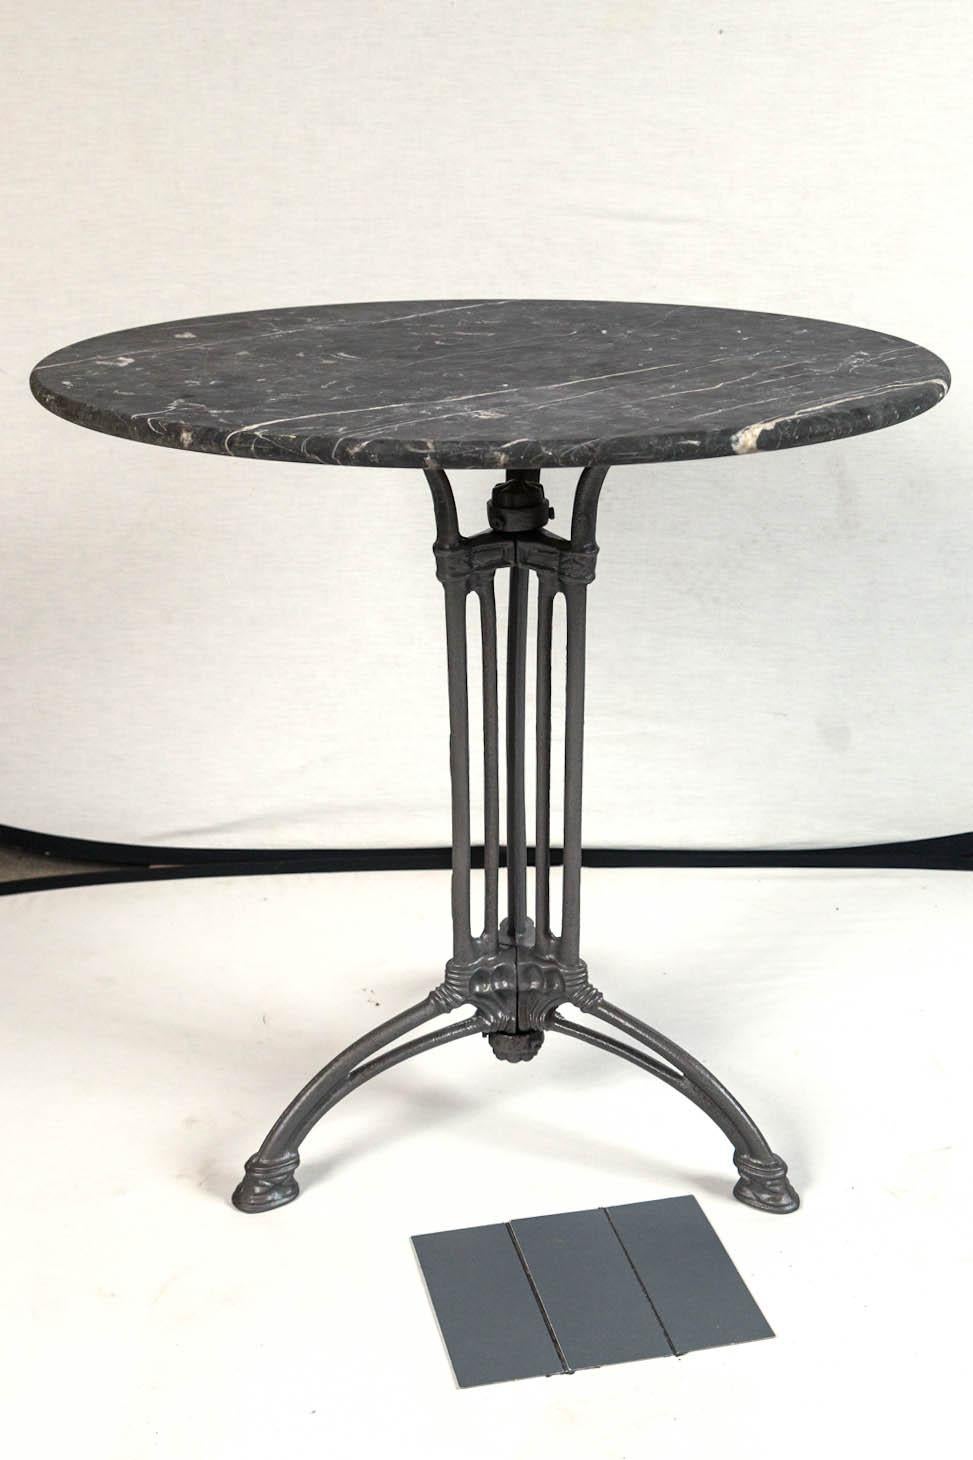 French marble top cast iron Bistro table, circa 1900. Original gray marble top with white veining. The tripod iron base has detailed cast designs in the Art Nouveau style.